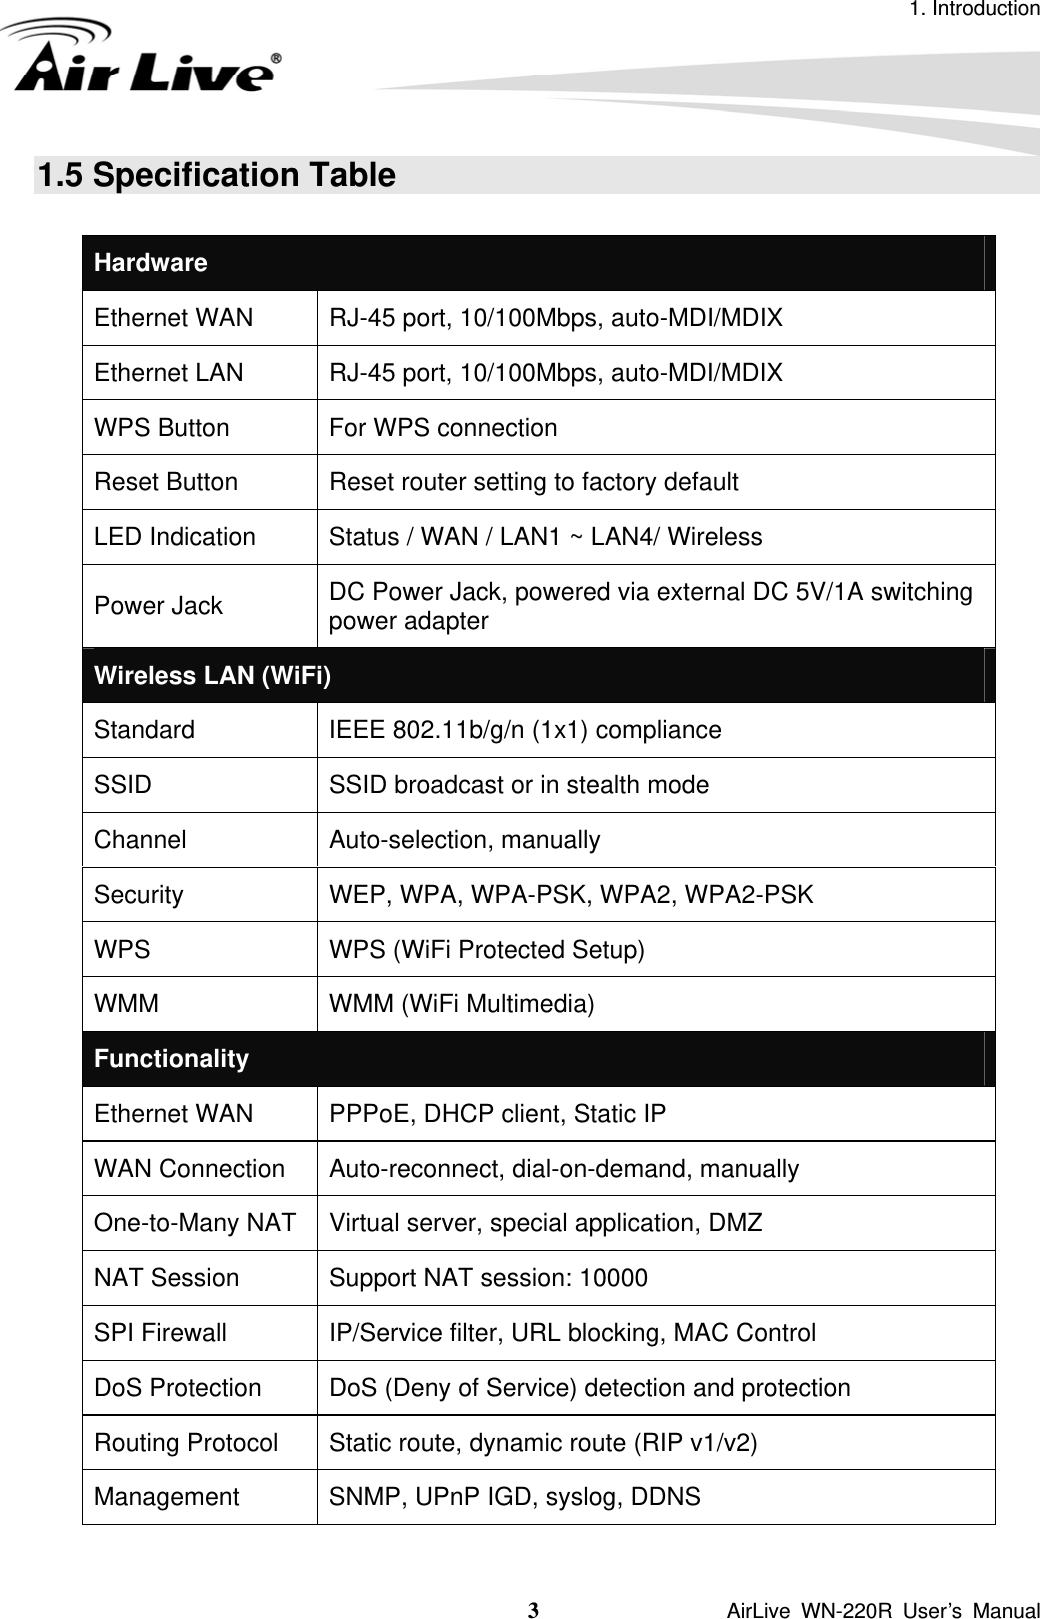 1. Introduction 3               AirLive WN-220R User’s Manual 1.5 Specification Table  Hardware  Ethernet WAN  RJ-45 port, 10/100Mbps, auto-MDI/MDIX Ethernet LAN  RJ-45 port, 10/100Mbps, auto-MDI/MDIX   WPS Button  For WPS connection Reset Button  Reset router setting to factory default LED Indication  Status / WAN / LAN1 ~ LAN4/ Wireless Power Jack  DC Power Jack, powered via external DC 5V/1A switching power adapter Wireless LAN (WiFi) Standard  IEEE 802.11b/g/n (1x1) compliance SSID  SSID broadcast or in stealth mode Channel Auto-selection, manually Security  WEP, WPA, WPA-PSK, WPA2, WPA2-PSK WPS  WPS (WiFi Protected Setup) WMM WMM (WiFi Multimedia) Functionality Ethernet WAN  PPPoE, DHCP client, Static IP WAN Connection  Auto-reconnect, dial-on-demand, manually One-to-Many NAT  Virtual server, special application, DMZ NAT Session  Support NAT session: 10000 SPI Firewall  IP/Service filter, URL blocking, MAC Control DoS Protection  DoS (Deny of Service) detection and protection Routing Protocol  Static route, dynamic route (RIP v1/v2) Management  SNMP, UPnP IGD, syslog, DDNS     